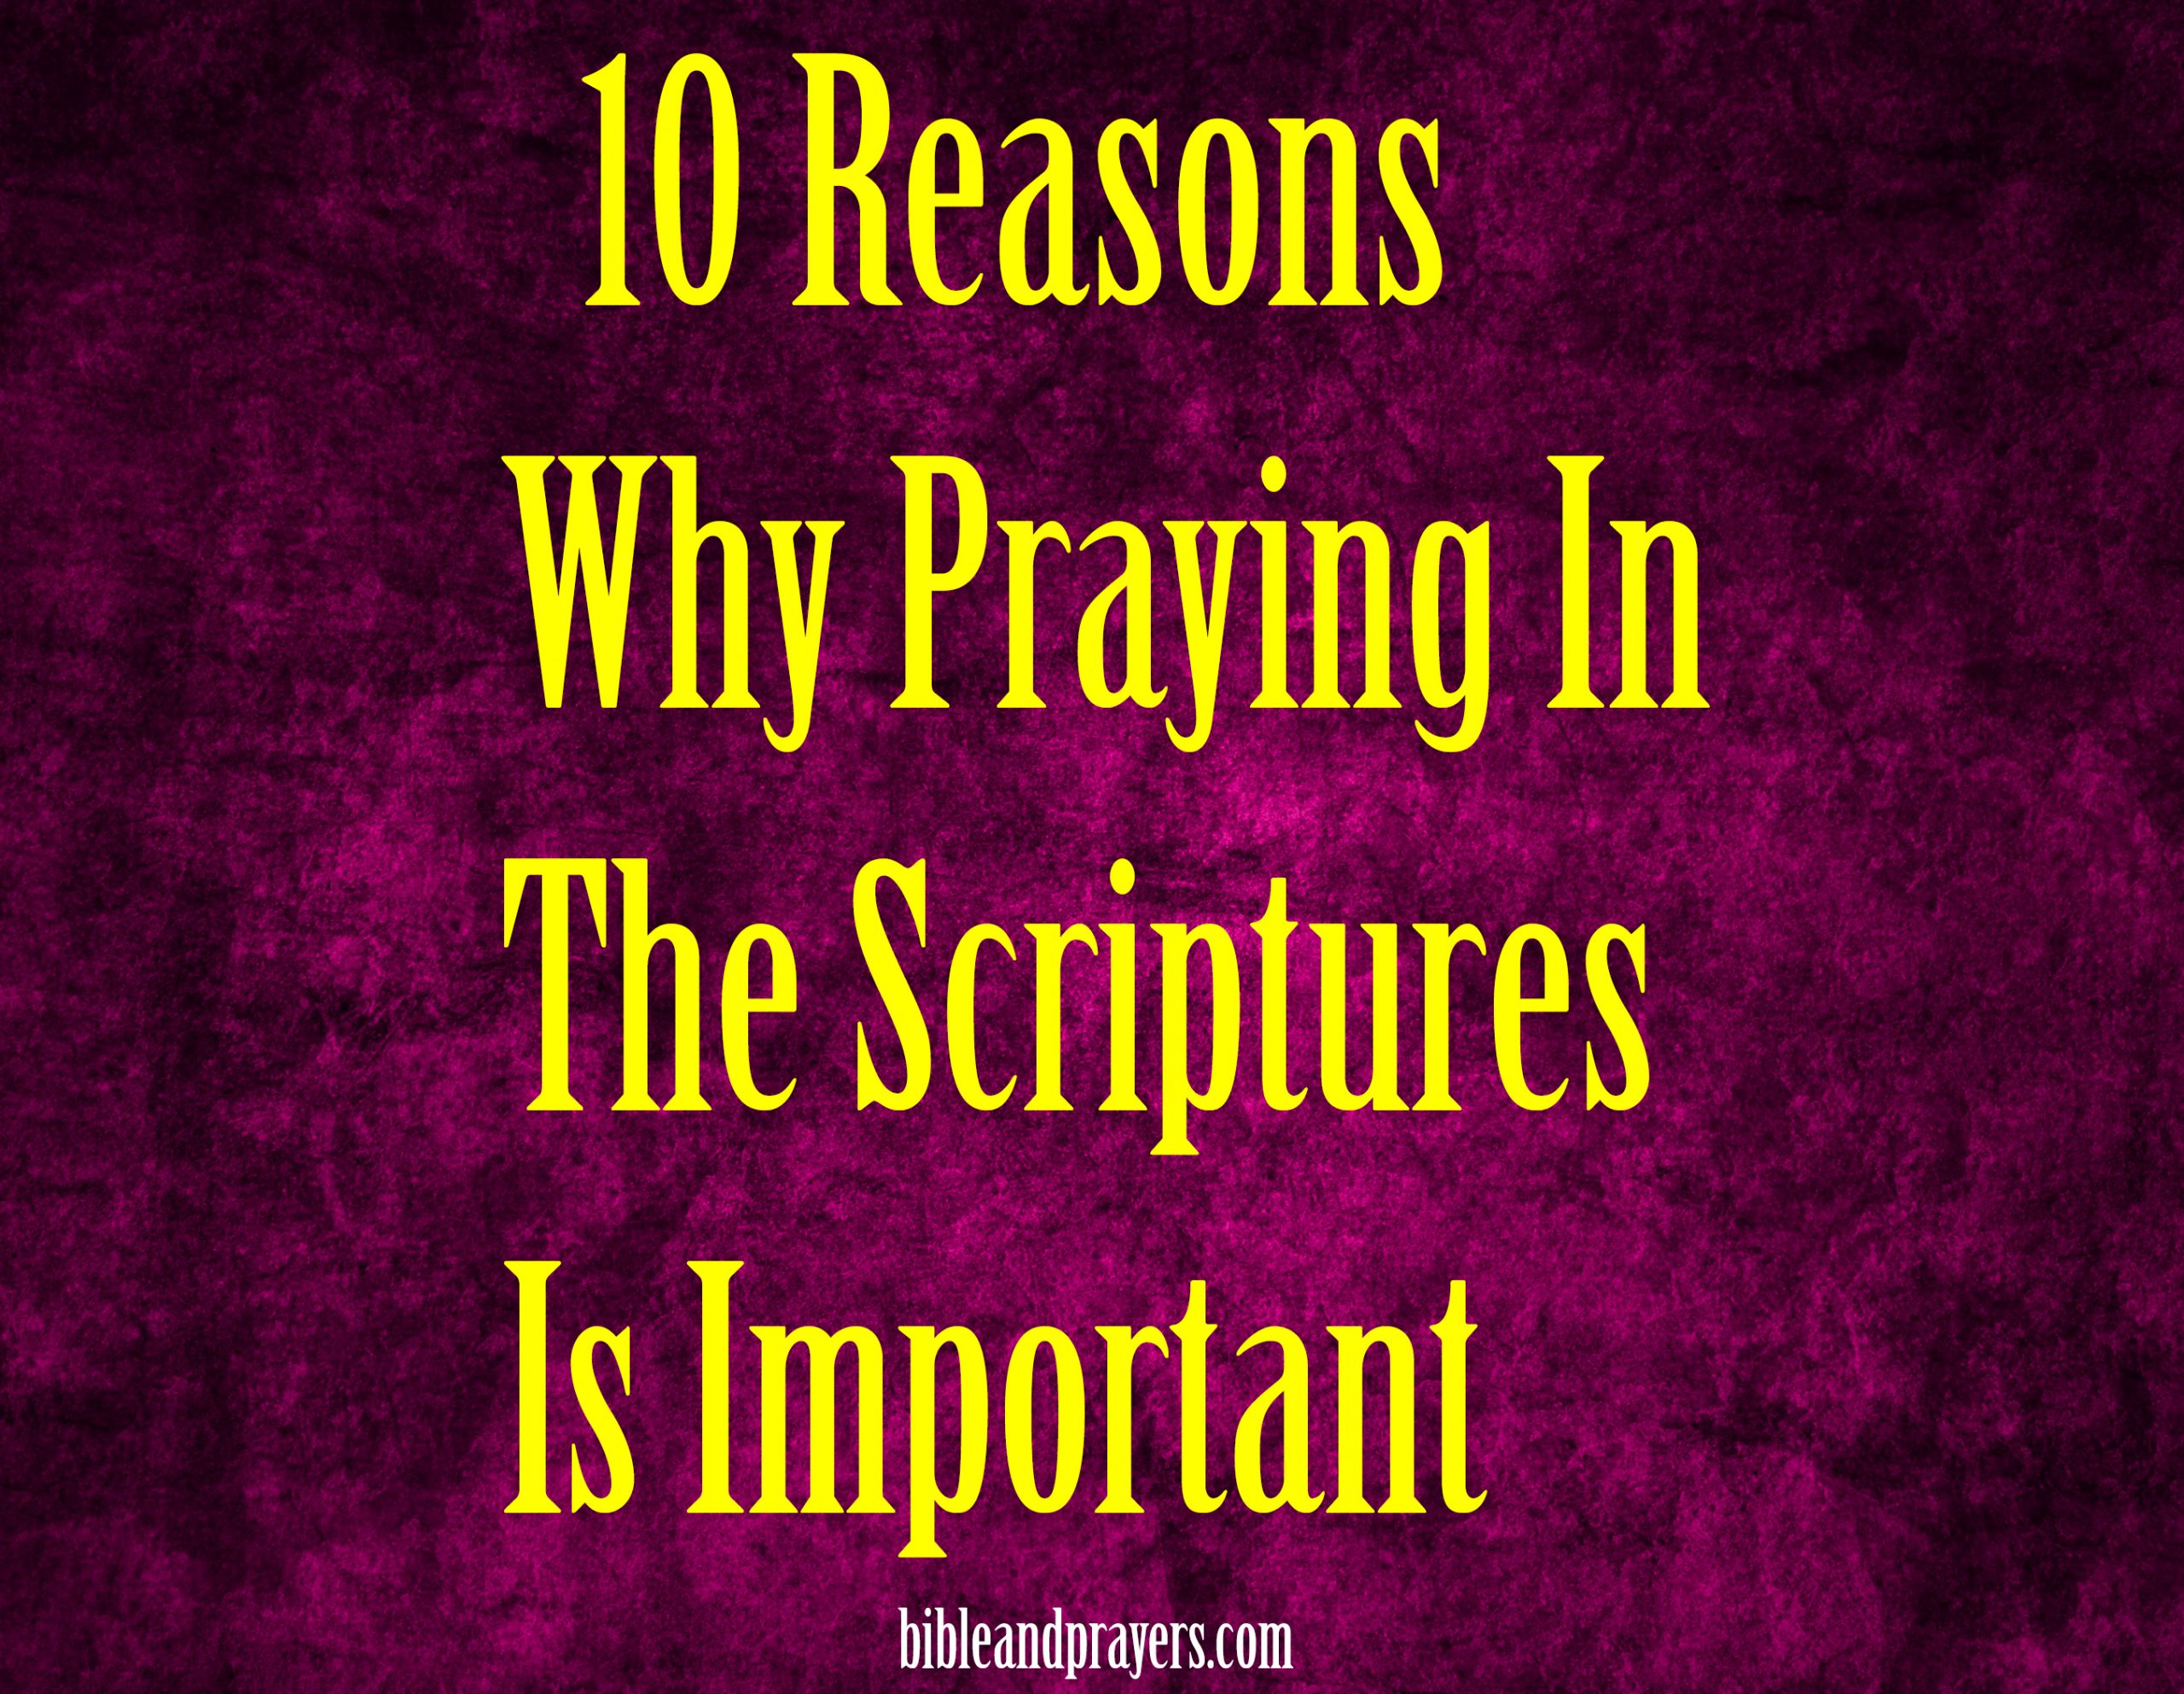 10 Reasons Why Praying In The Scriptures Is Important